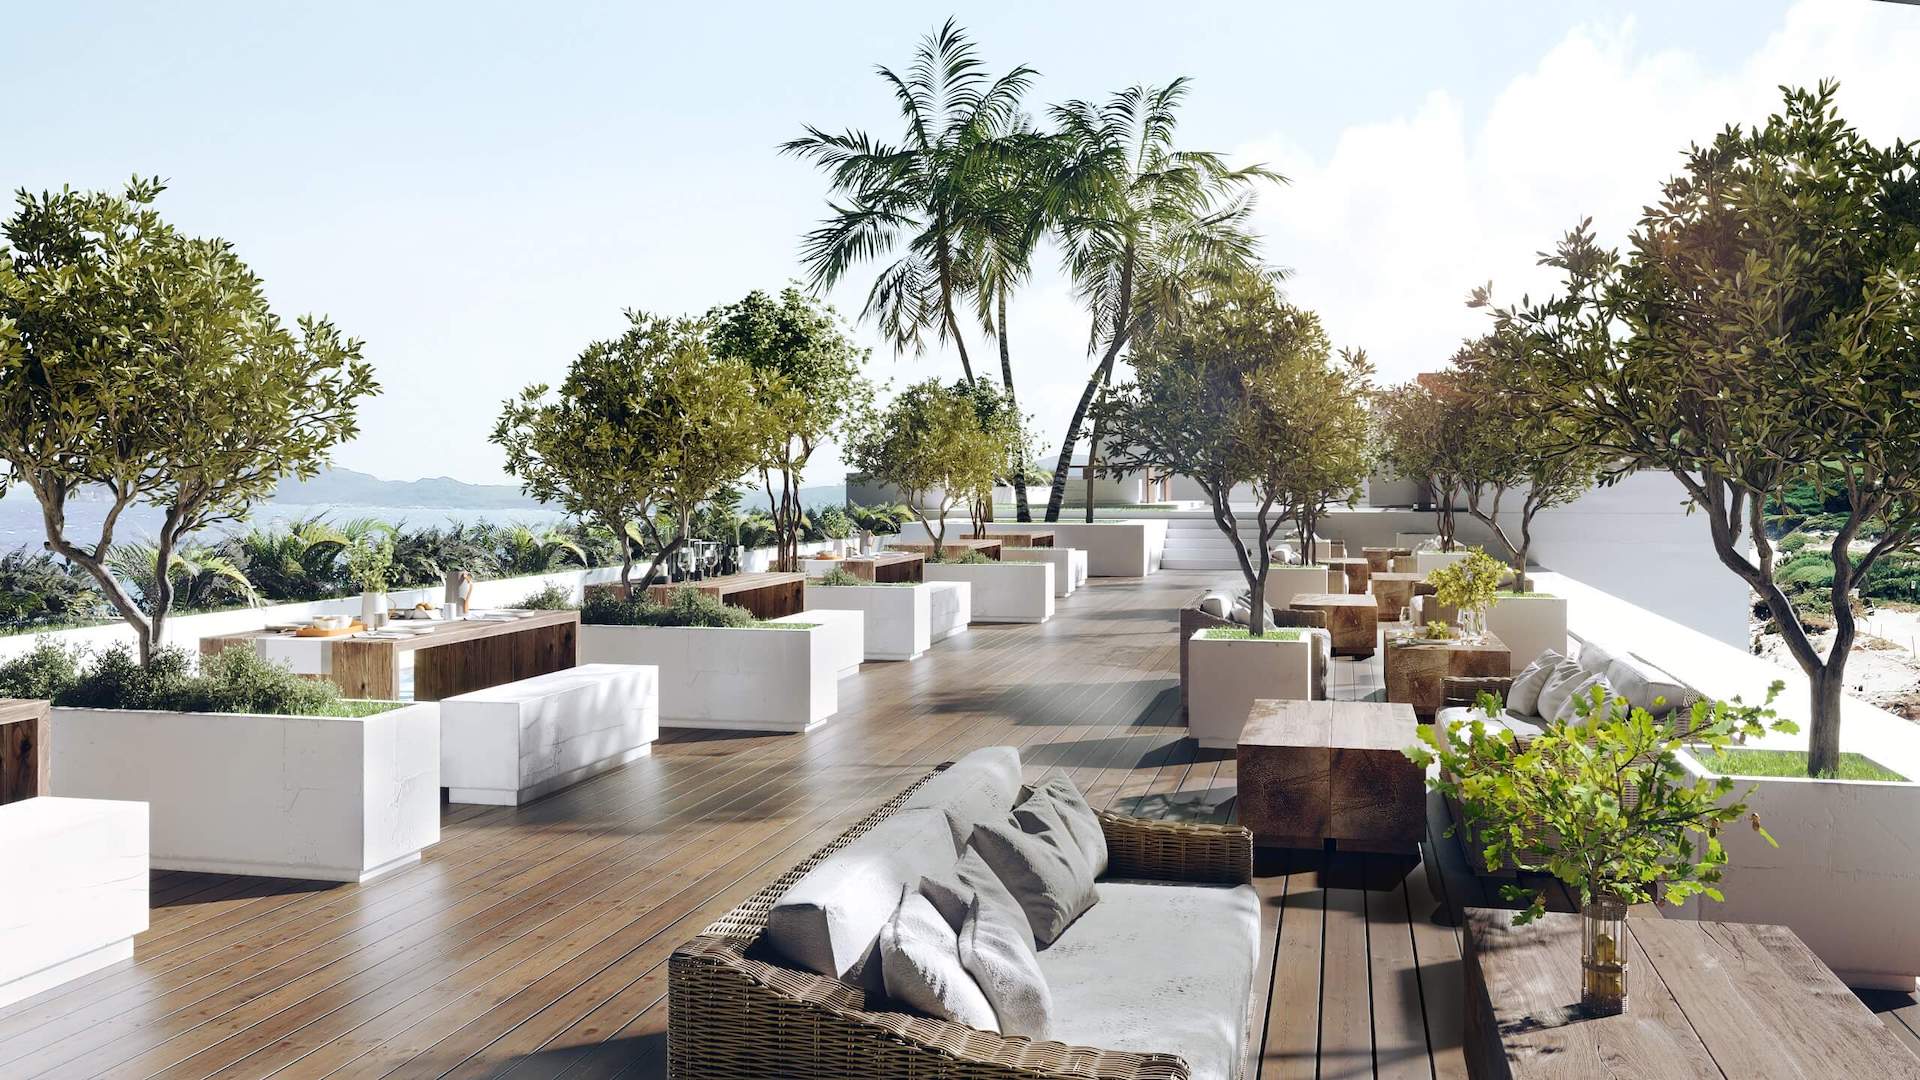 3D Visualization of a Stylish Rooftop Terrace by Outsourcing CGI Company